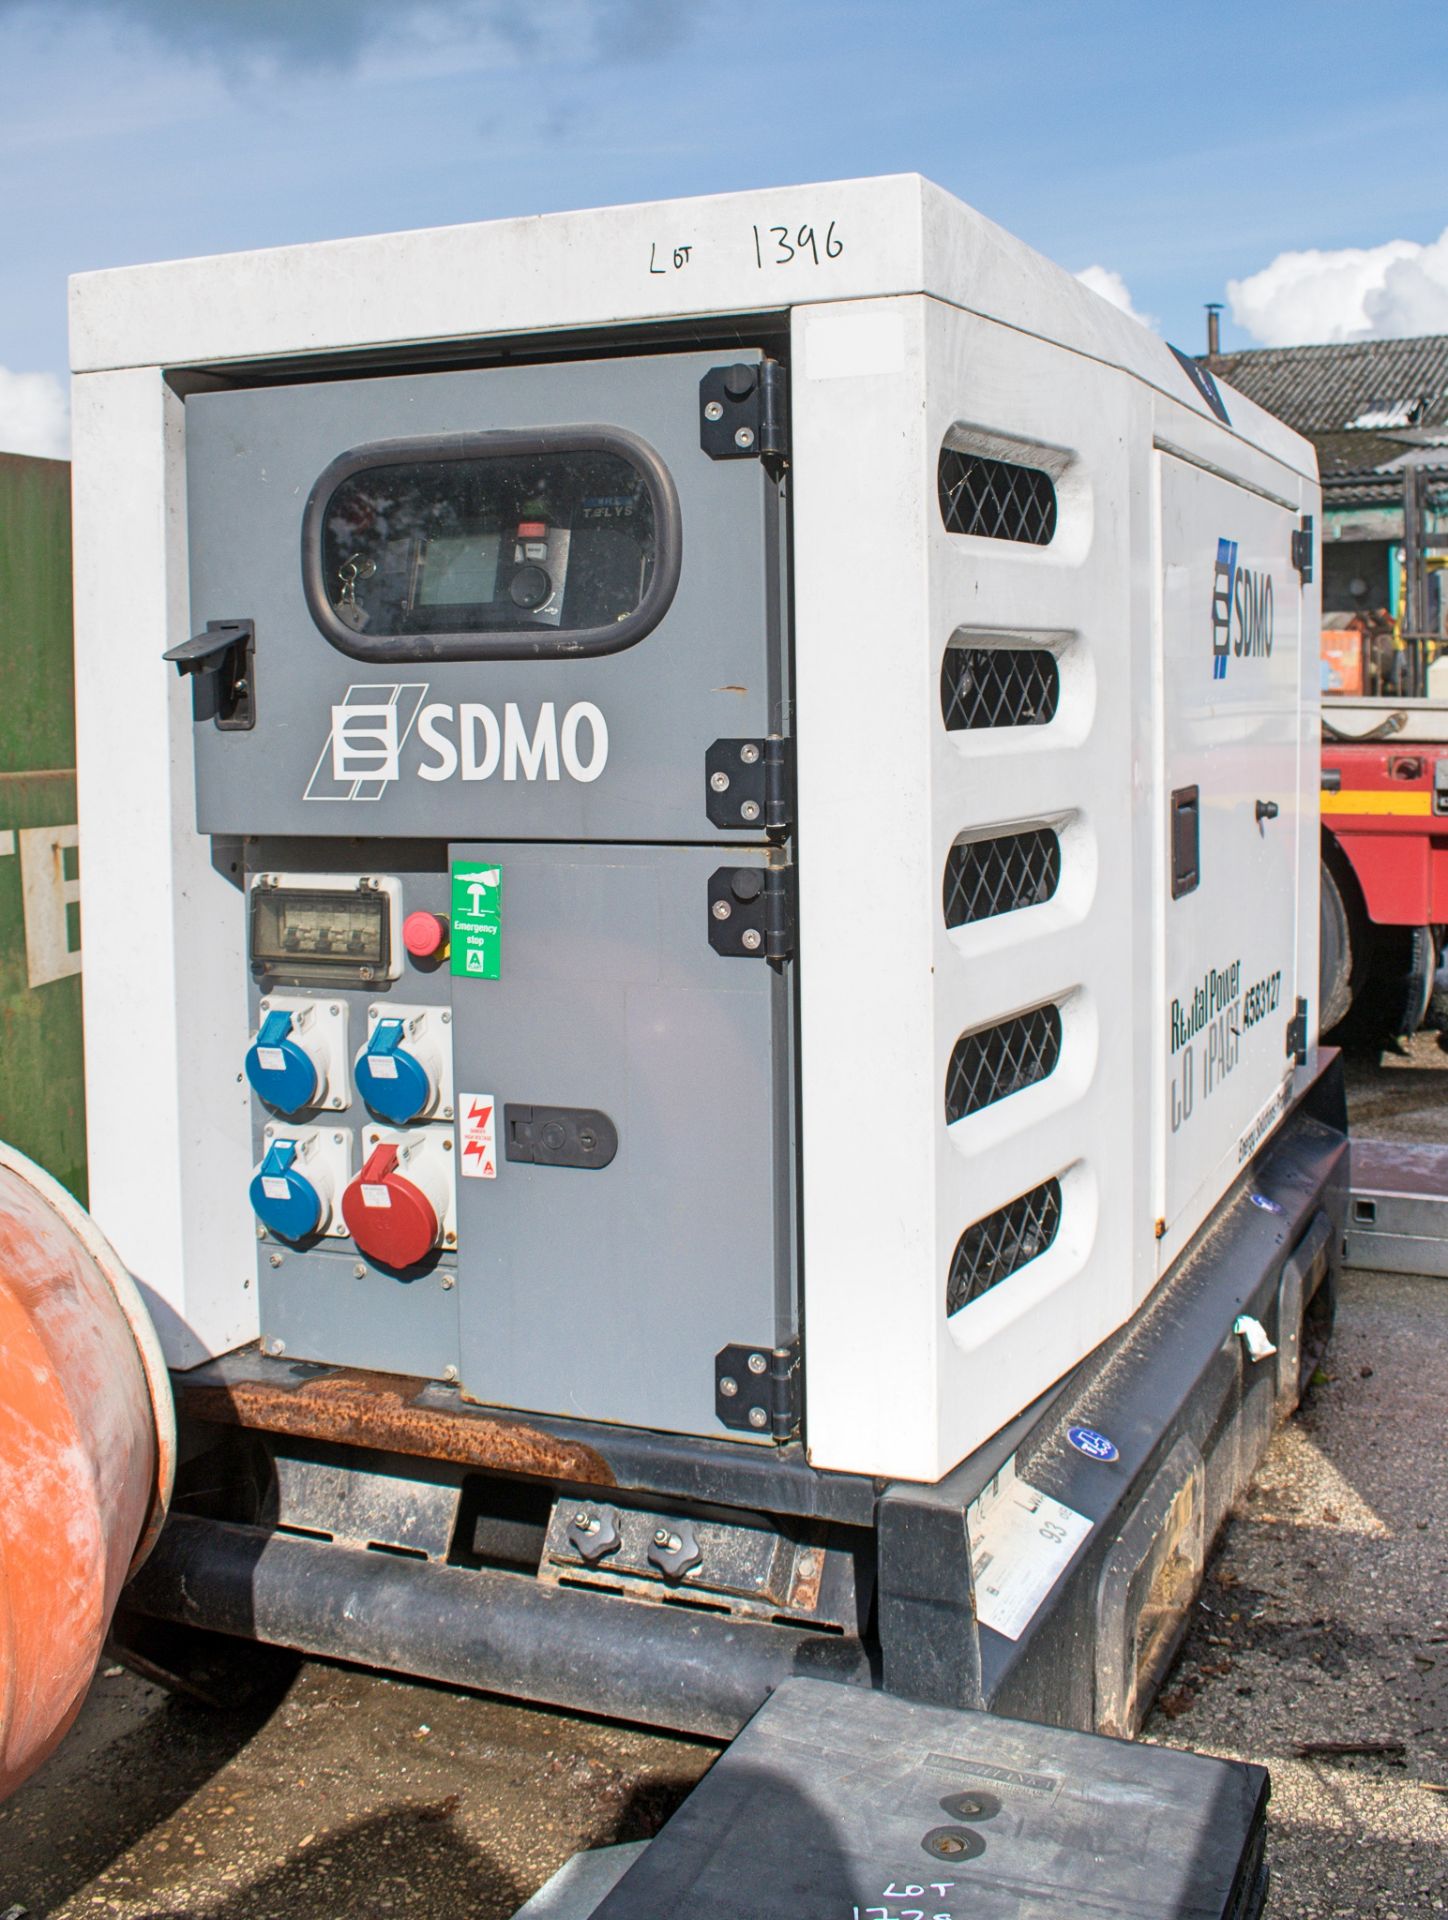 SDMO R33 33 kva diesel driven generator Year: 2012 S/N: 312007927 Recorded Hours: 27,411 A583127